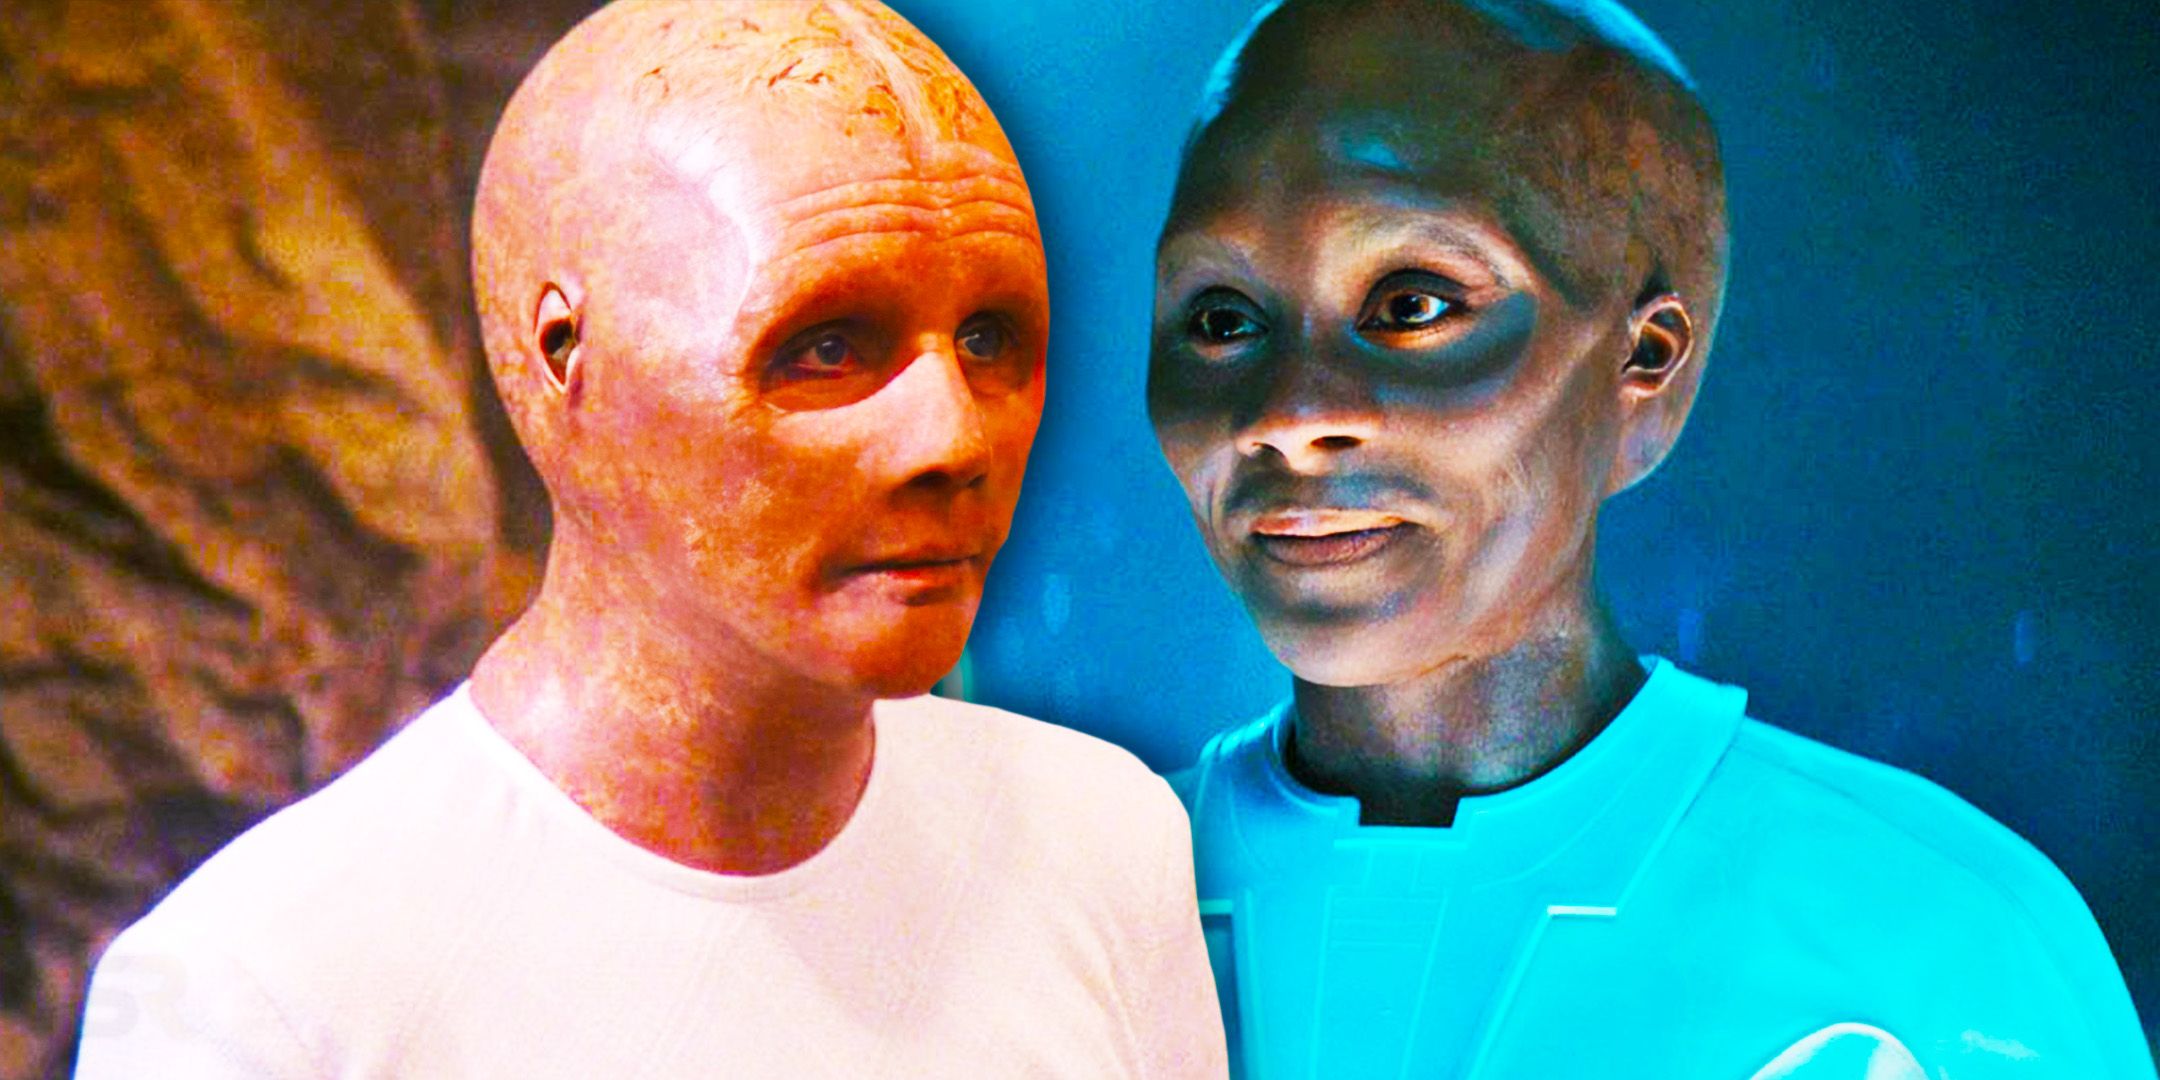 The progenitor from Star Trek TNG & from Star Trek Discovery